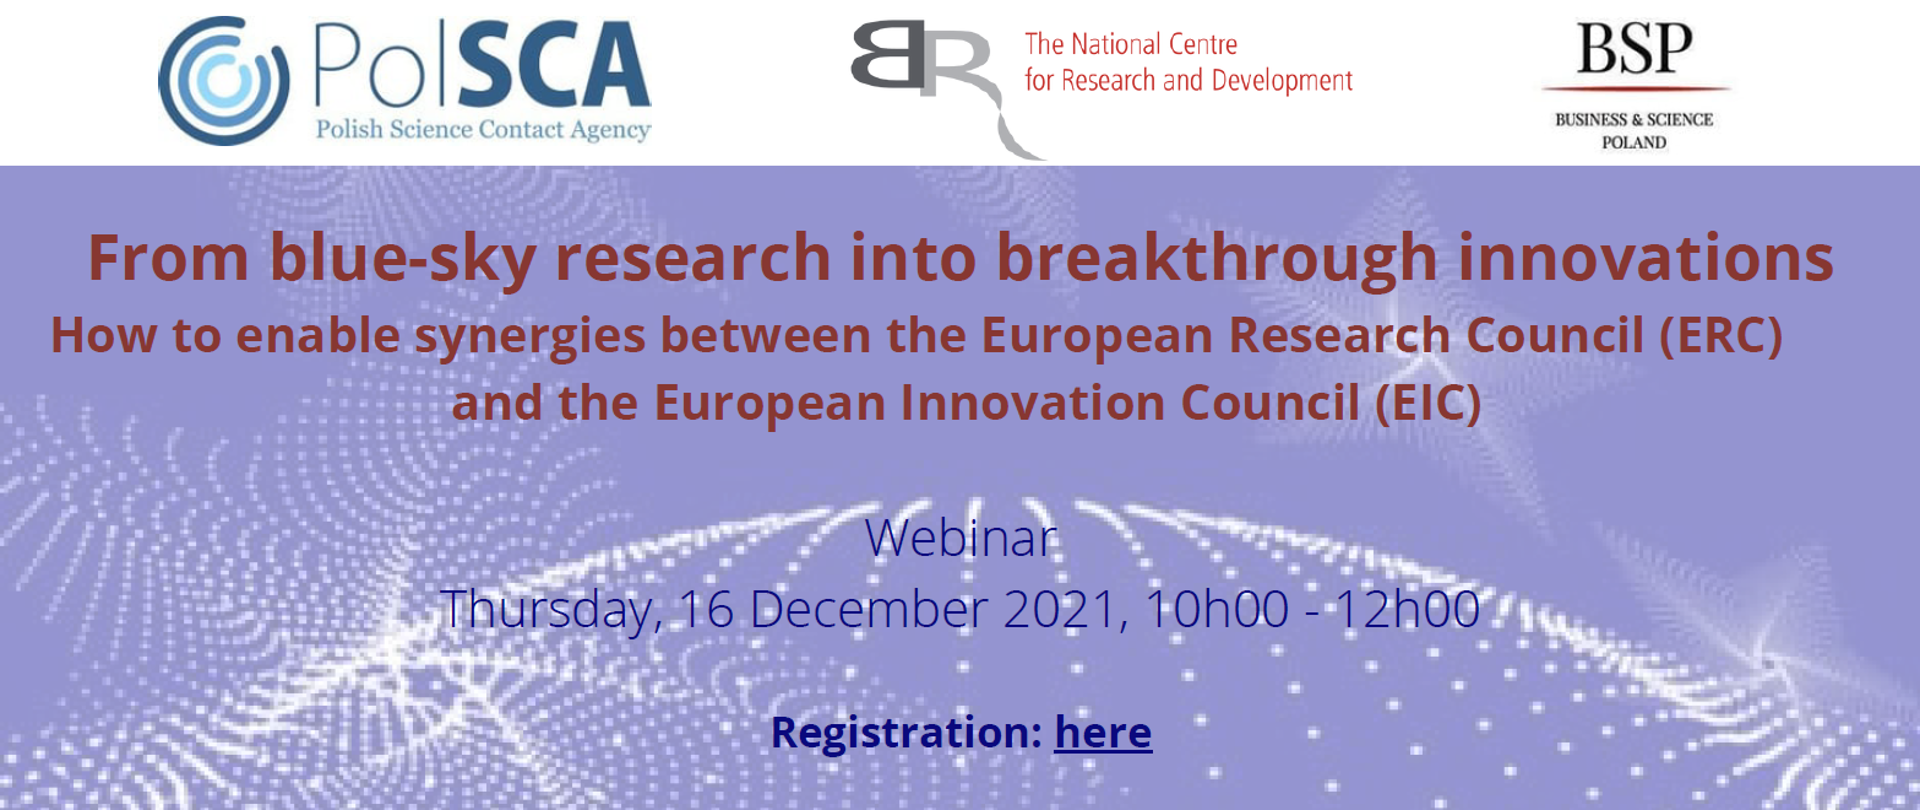 From blue-sky research into breakthrough innovations. How to enable synergies between the European Research Council (ERC) and the European Innovation Council (EIC)